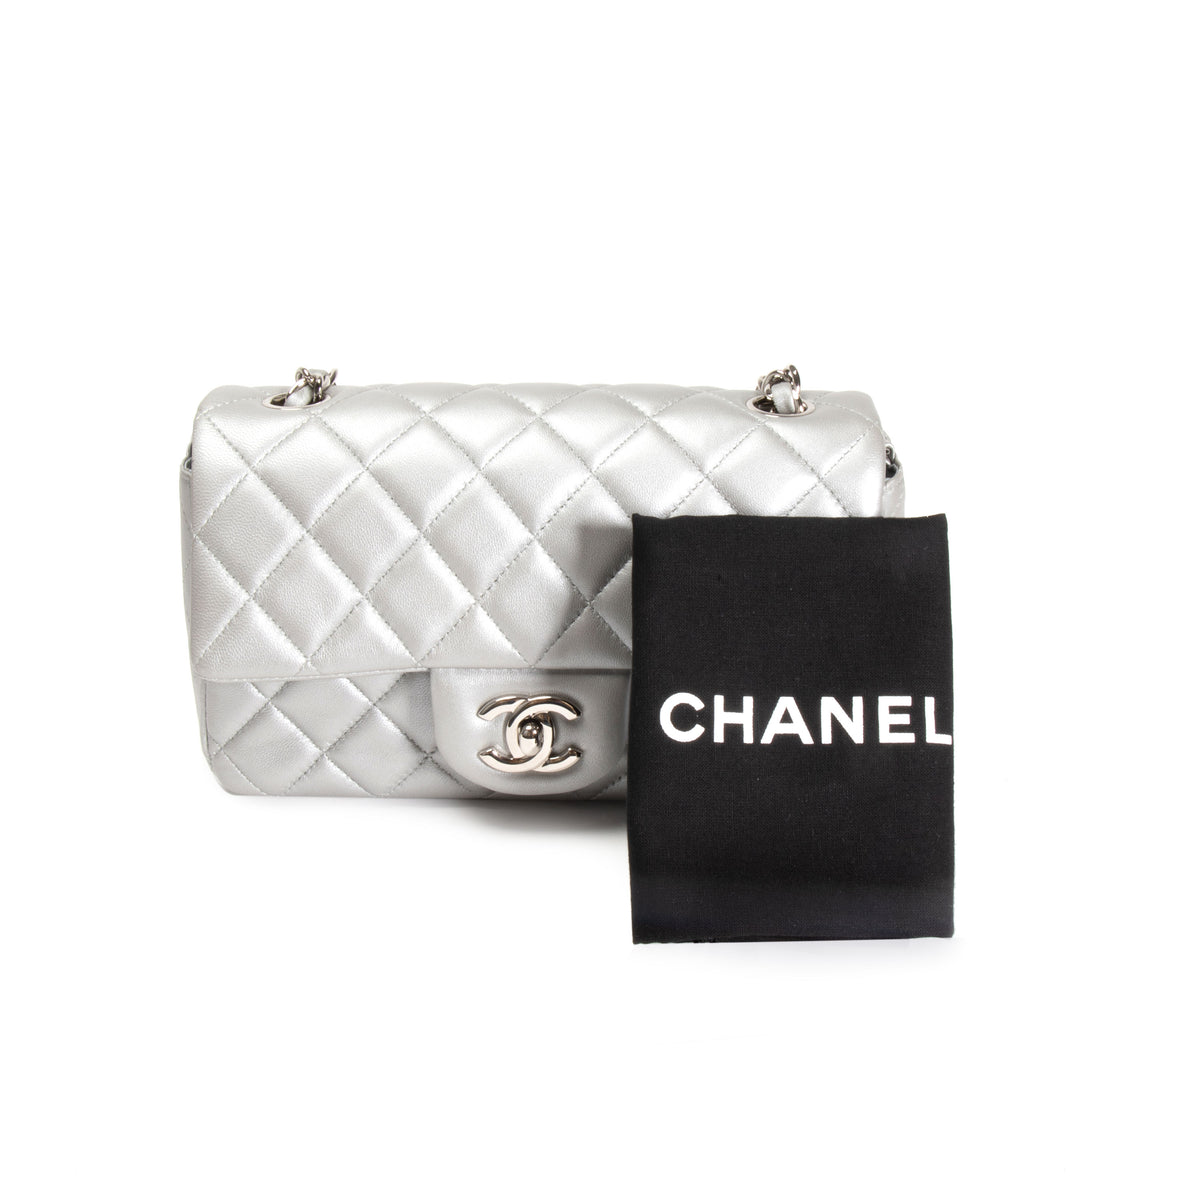 Chanel Violet Clair Quilted Lambskin Mini Flap Bag Silver Hardware, 2021